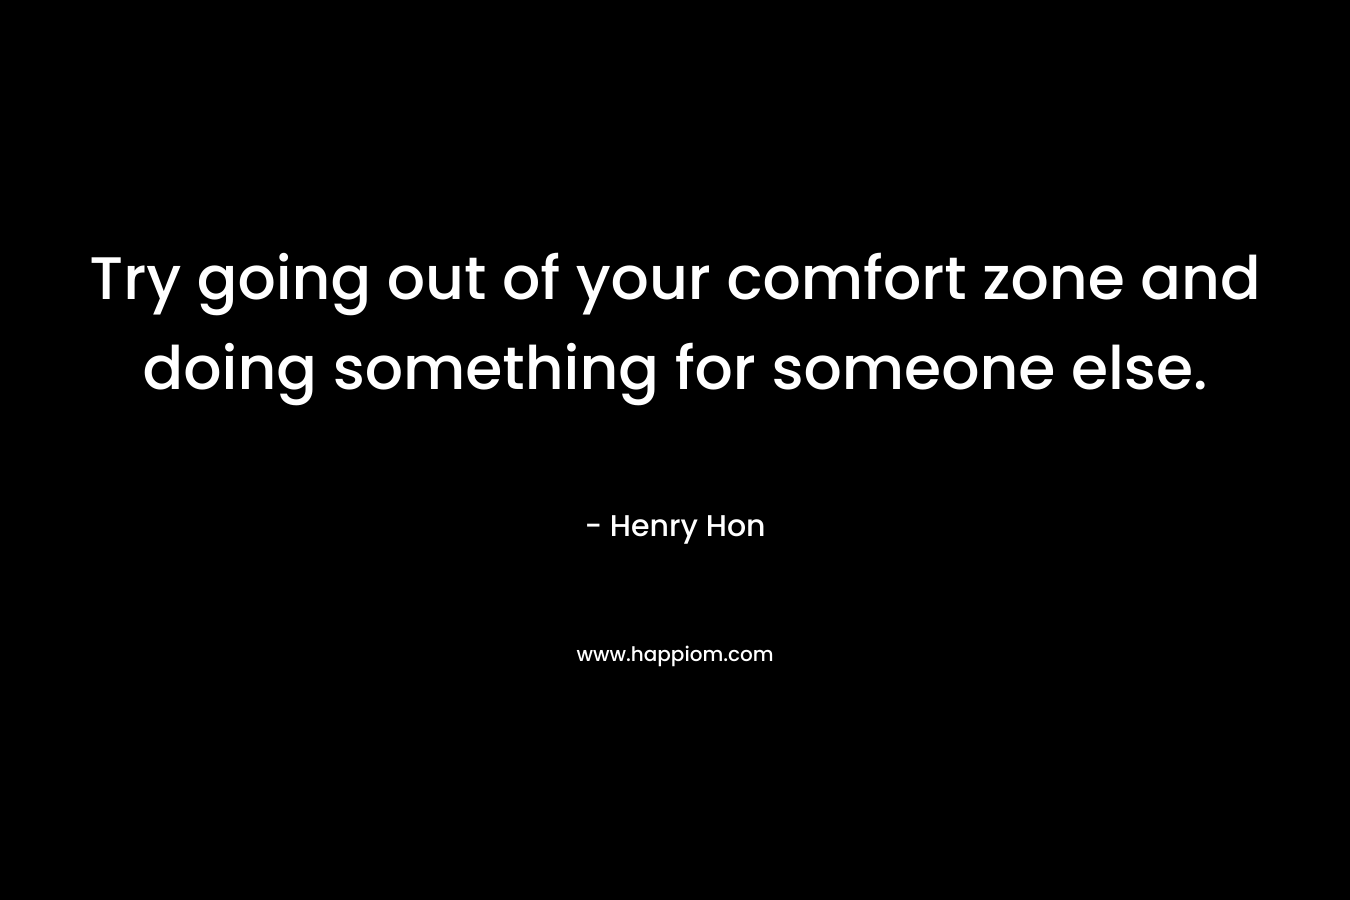 Try going out of your comfort zone and doing something for someone else. – Henry Hon